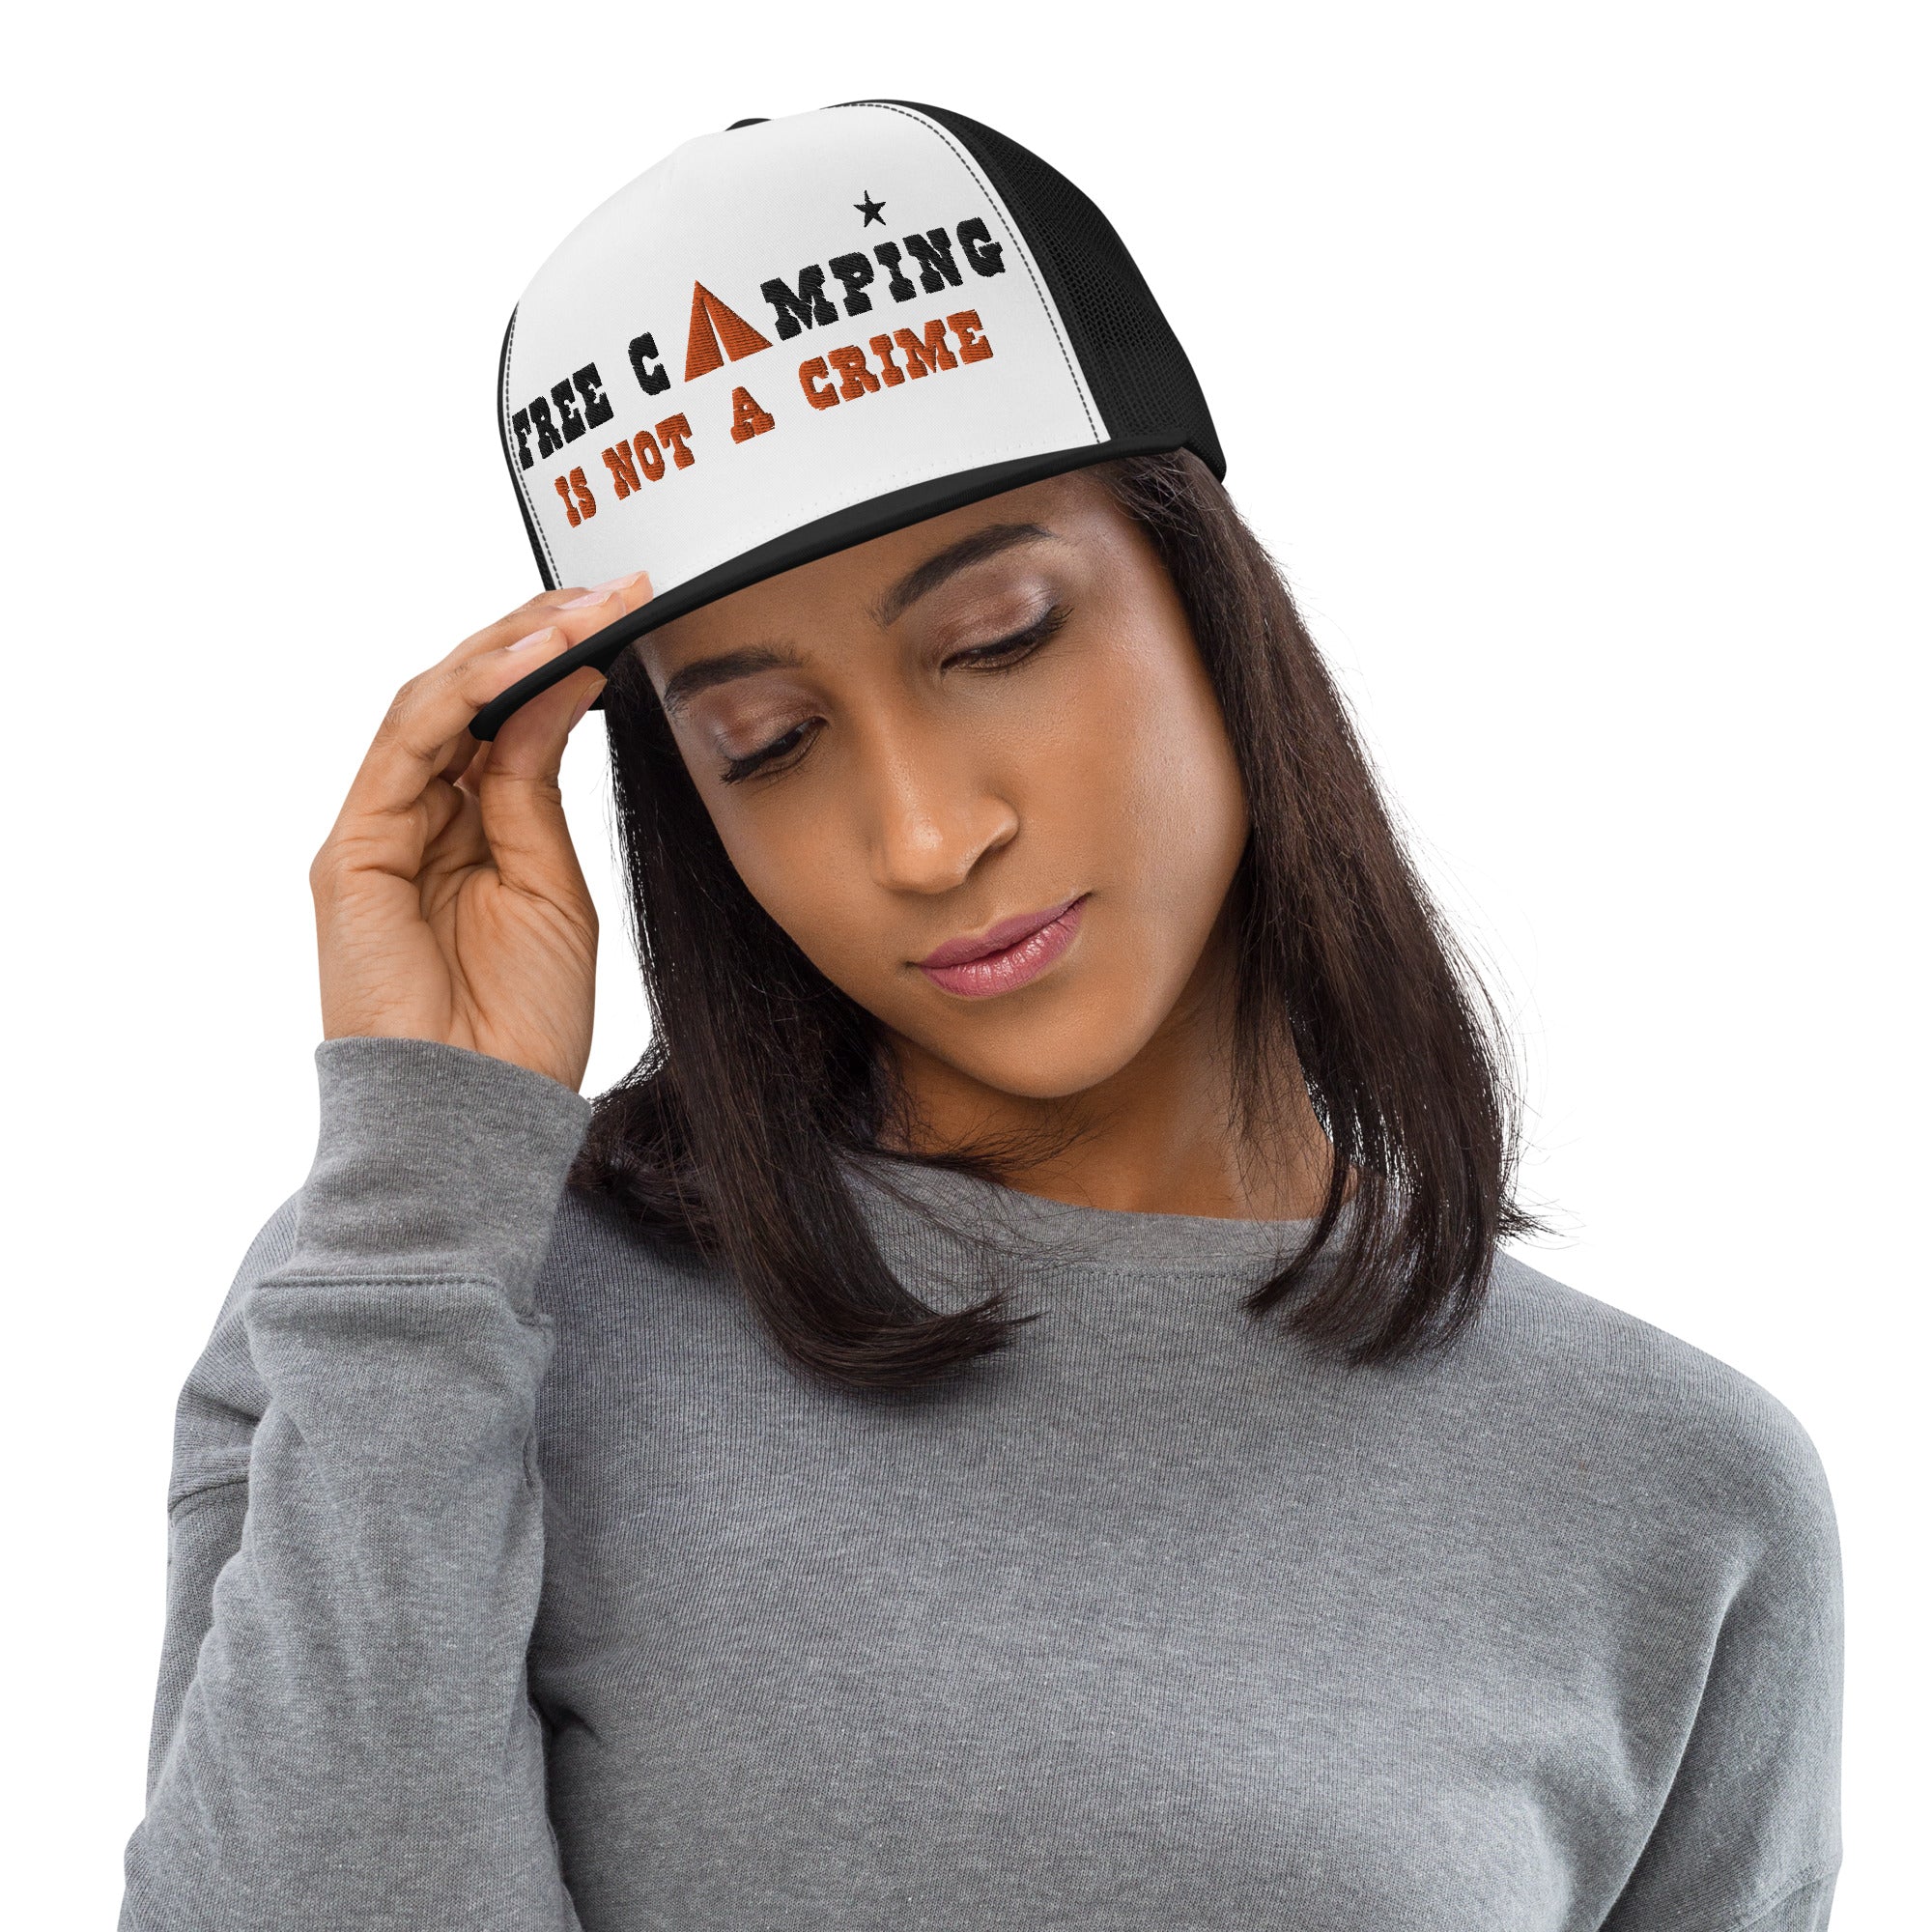 Two-Tone Trucker Cap Free camping is not a crime black/orange